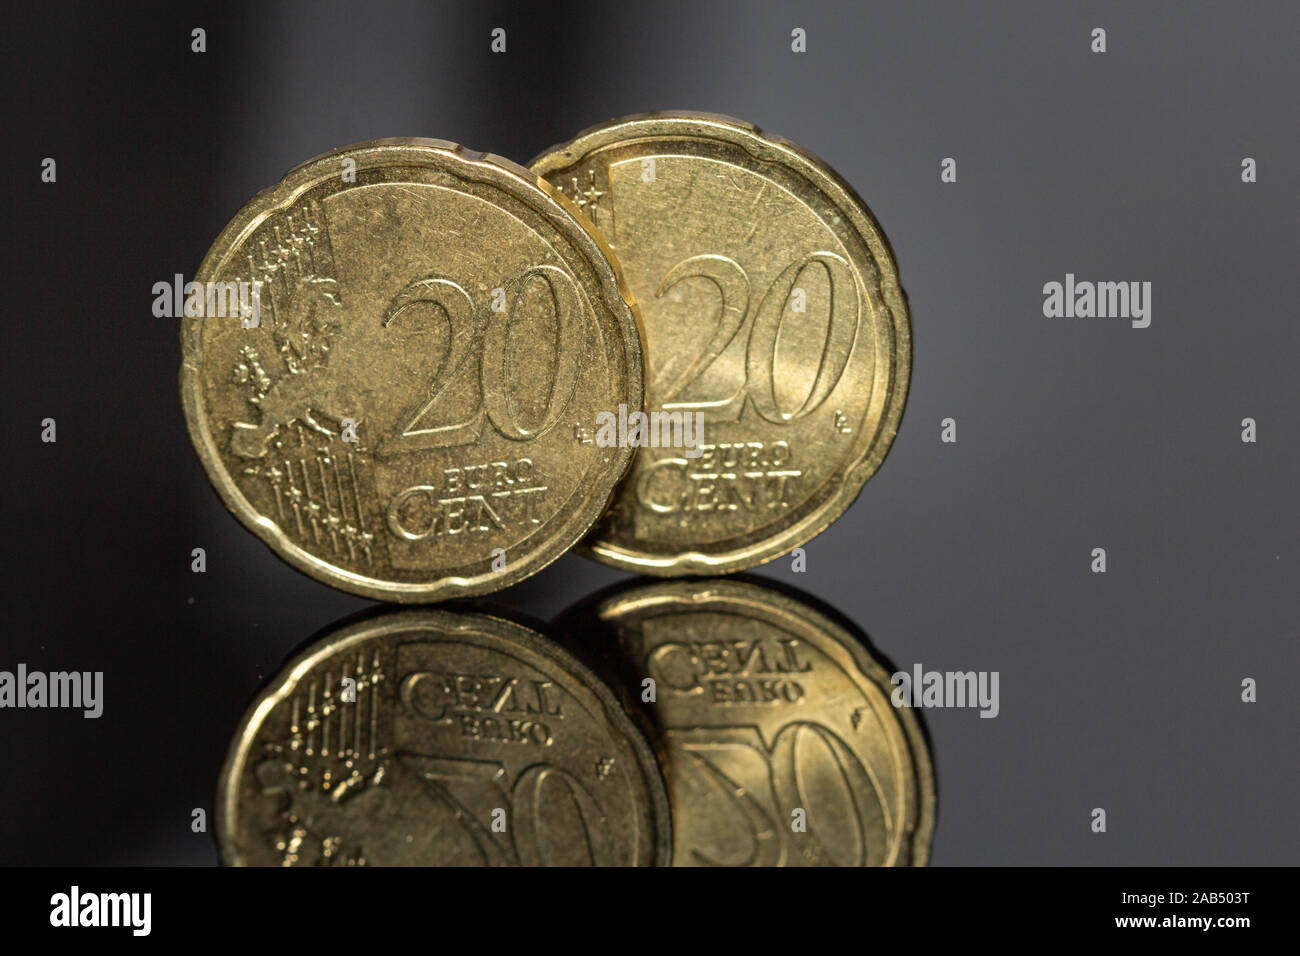 Two 20 Euro Cent Coins showing the year 2020. Stock Photo